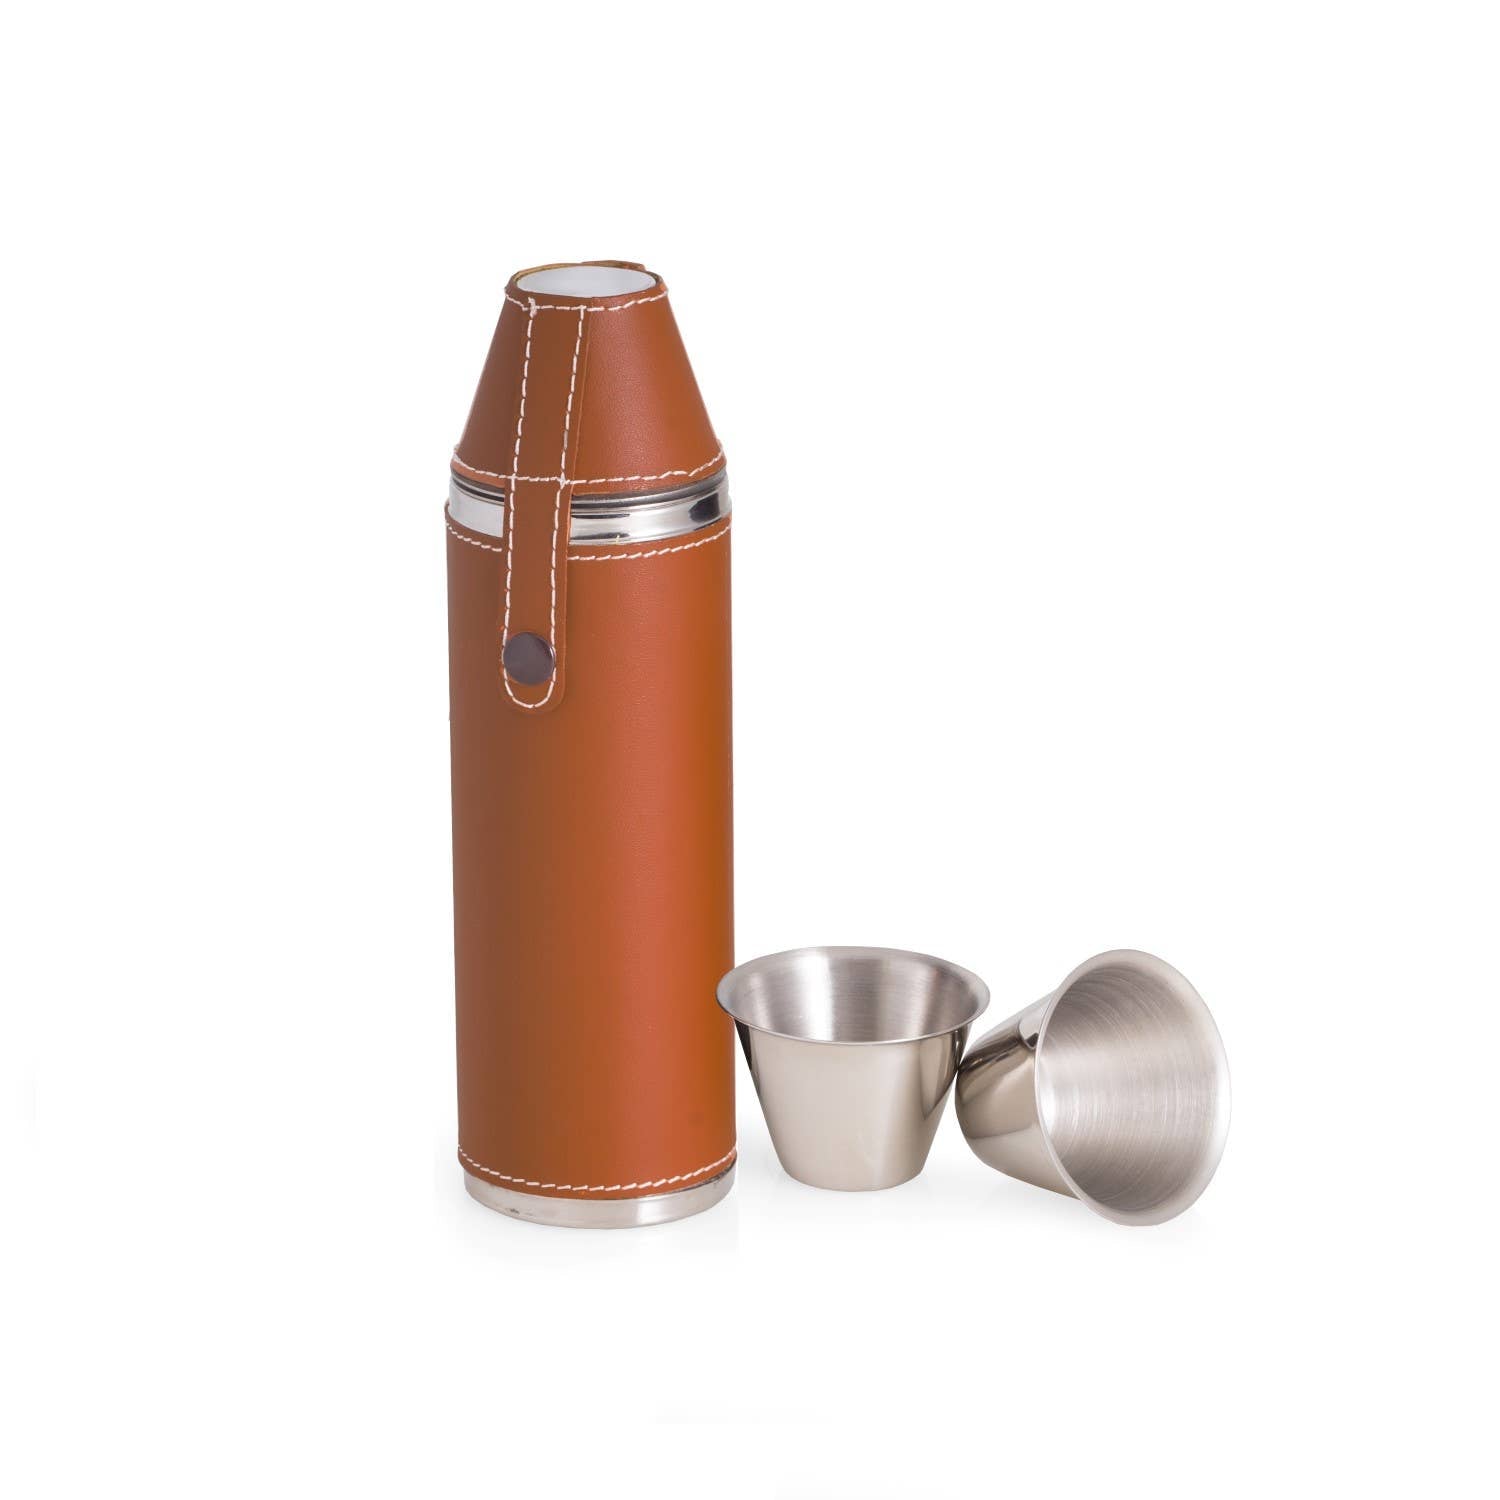 10 oz. Stainless Steel Tan Leather Flask